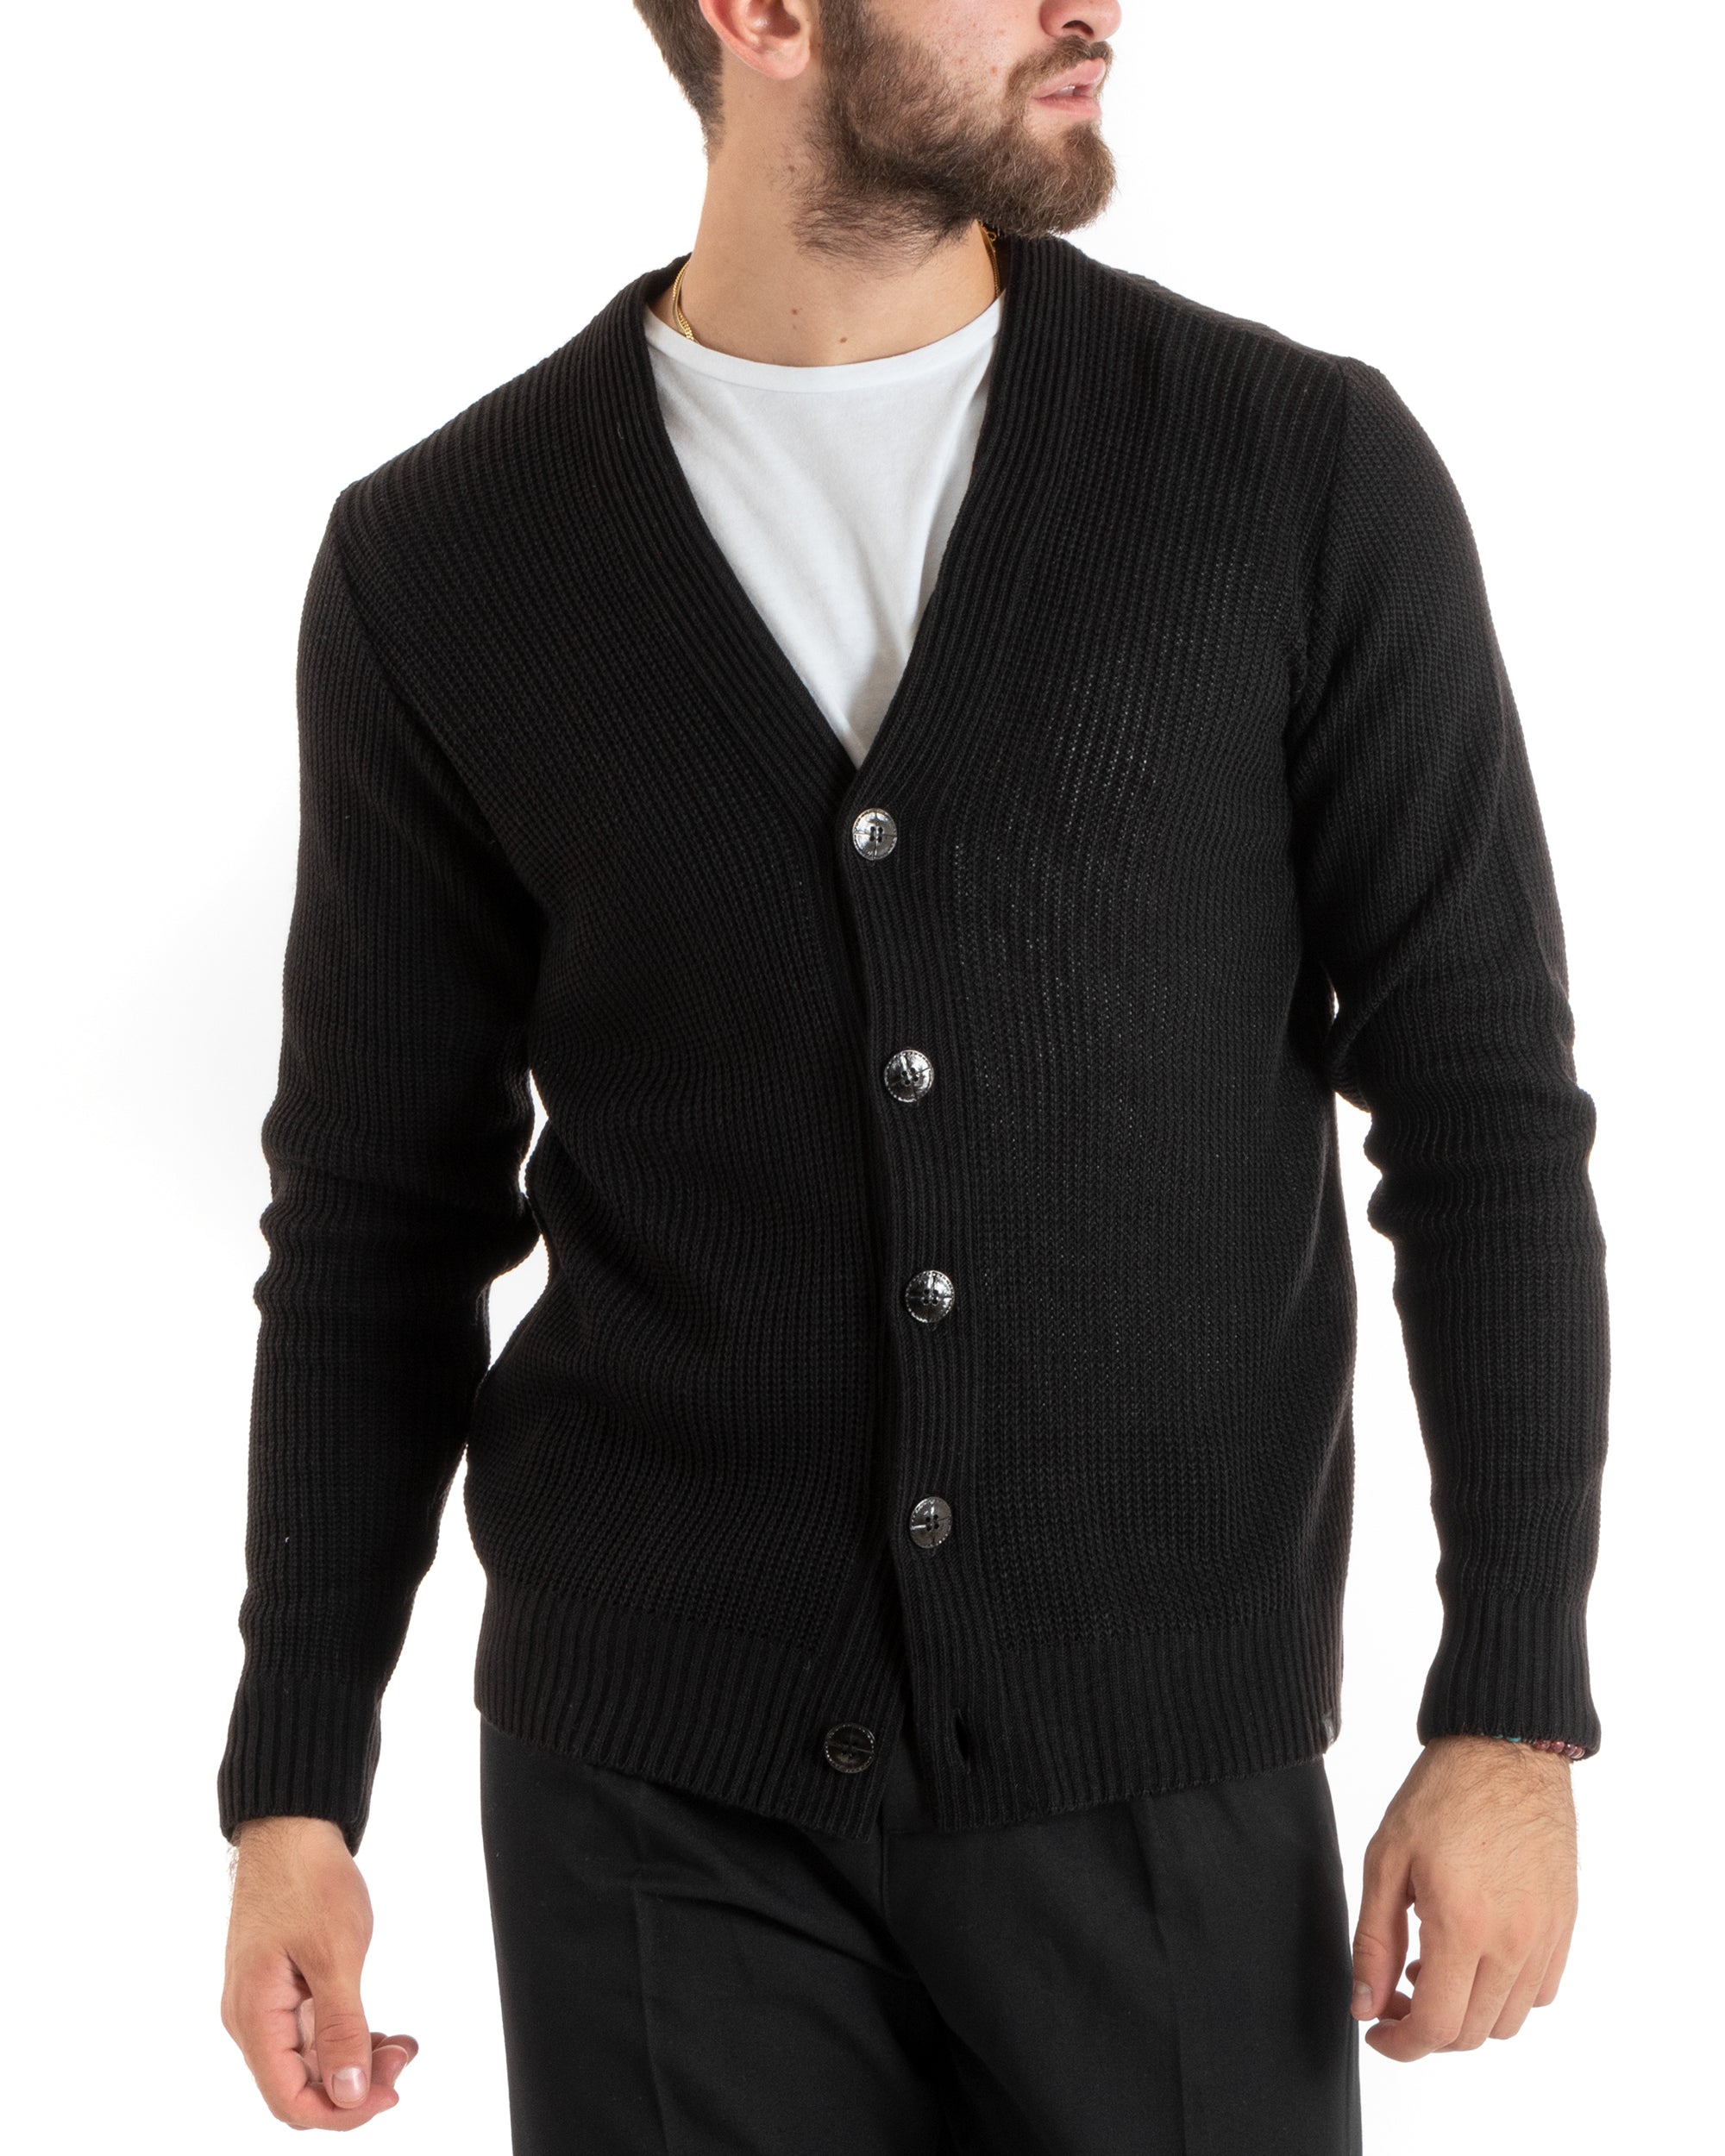 Men's Cardigan Jacket With Buttons V-Neck Sweater English Knit Black GIOSAL-M2675A